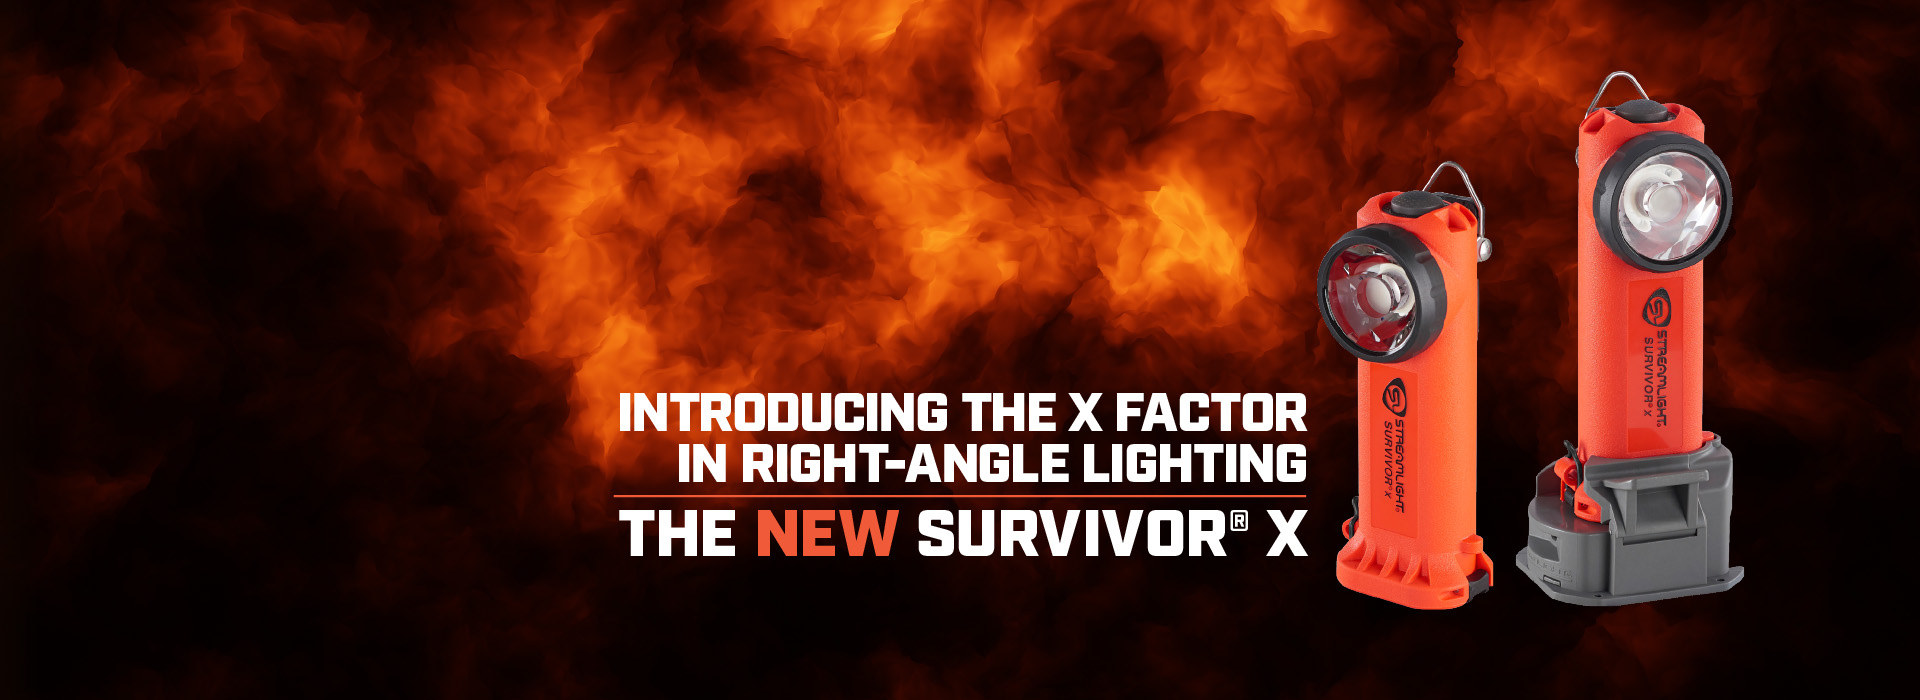 NEW SURVIVOR® X :: THE X FACTOR IN RIGHT-ANGLE LIGHTING